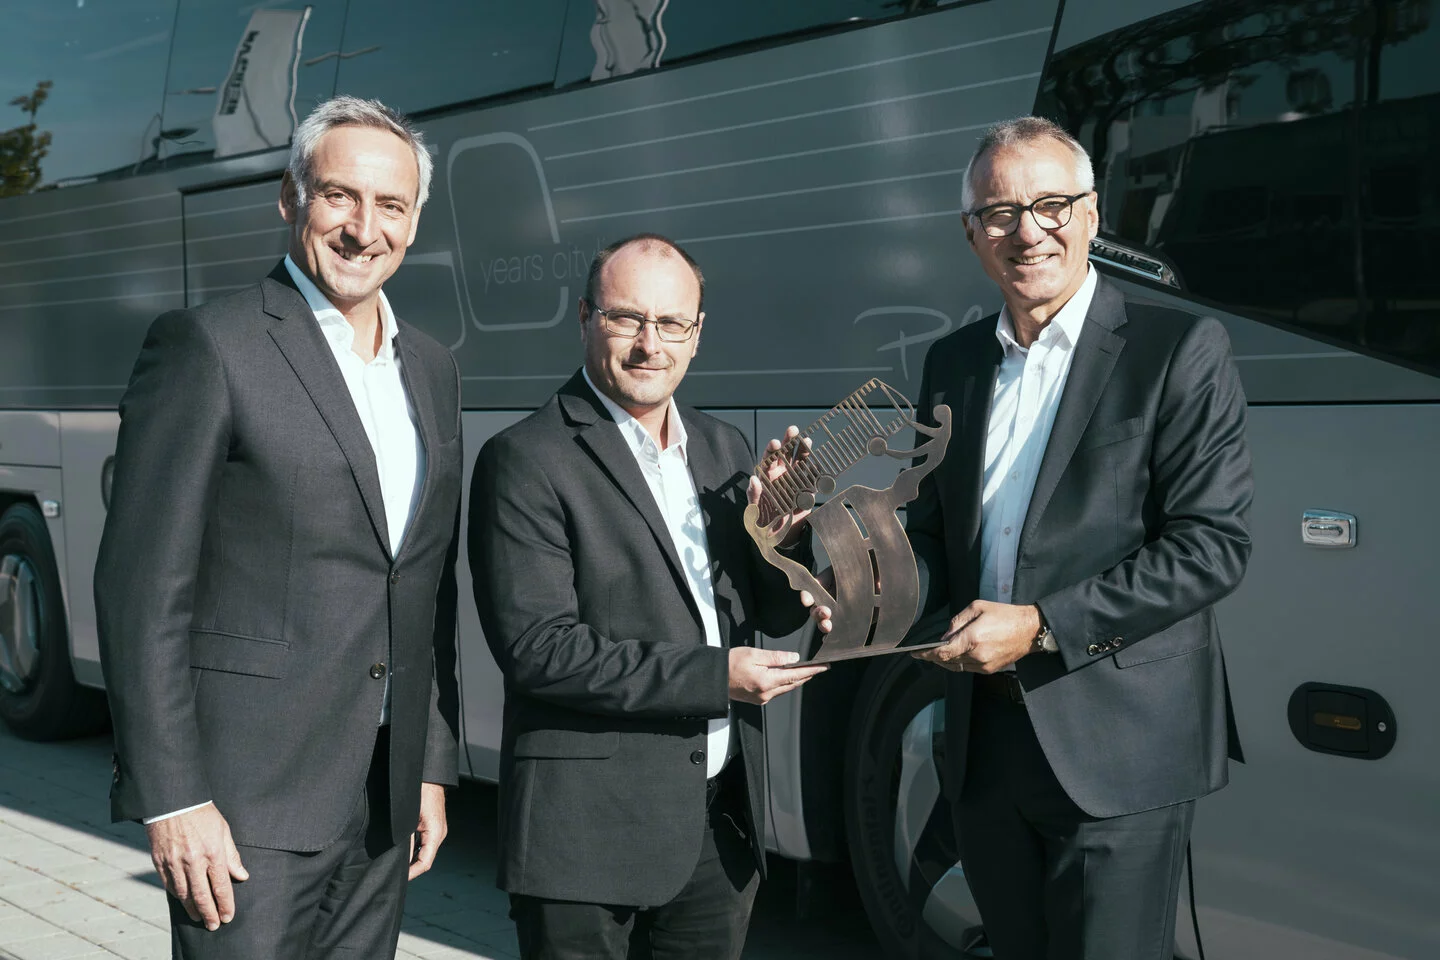 Coach of the Year 2022: NEOPLAN Cityliner